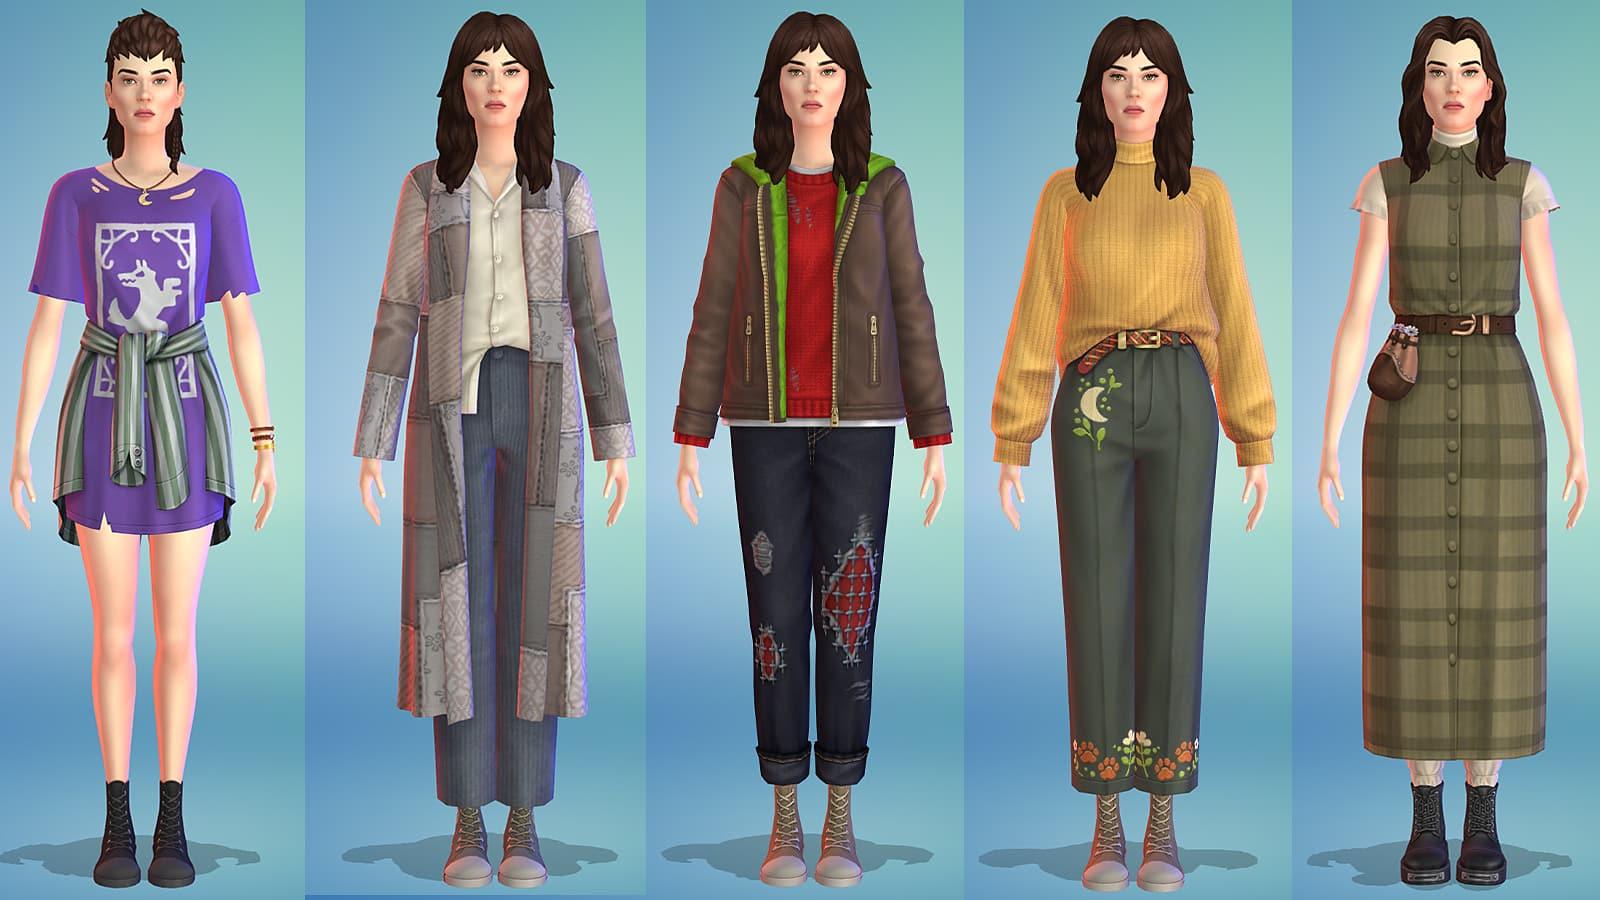 The Sims 4: Complete Guide to Create-a-Sim (CaS) Mode - LevelSkip